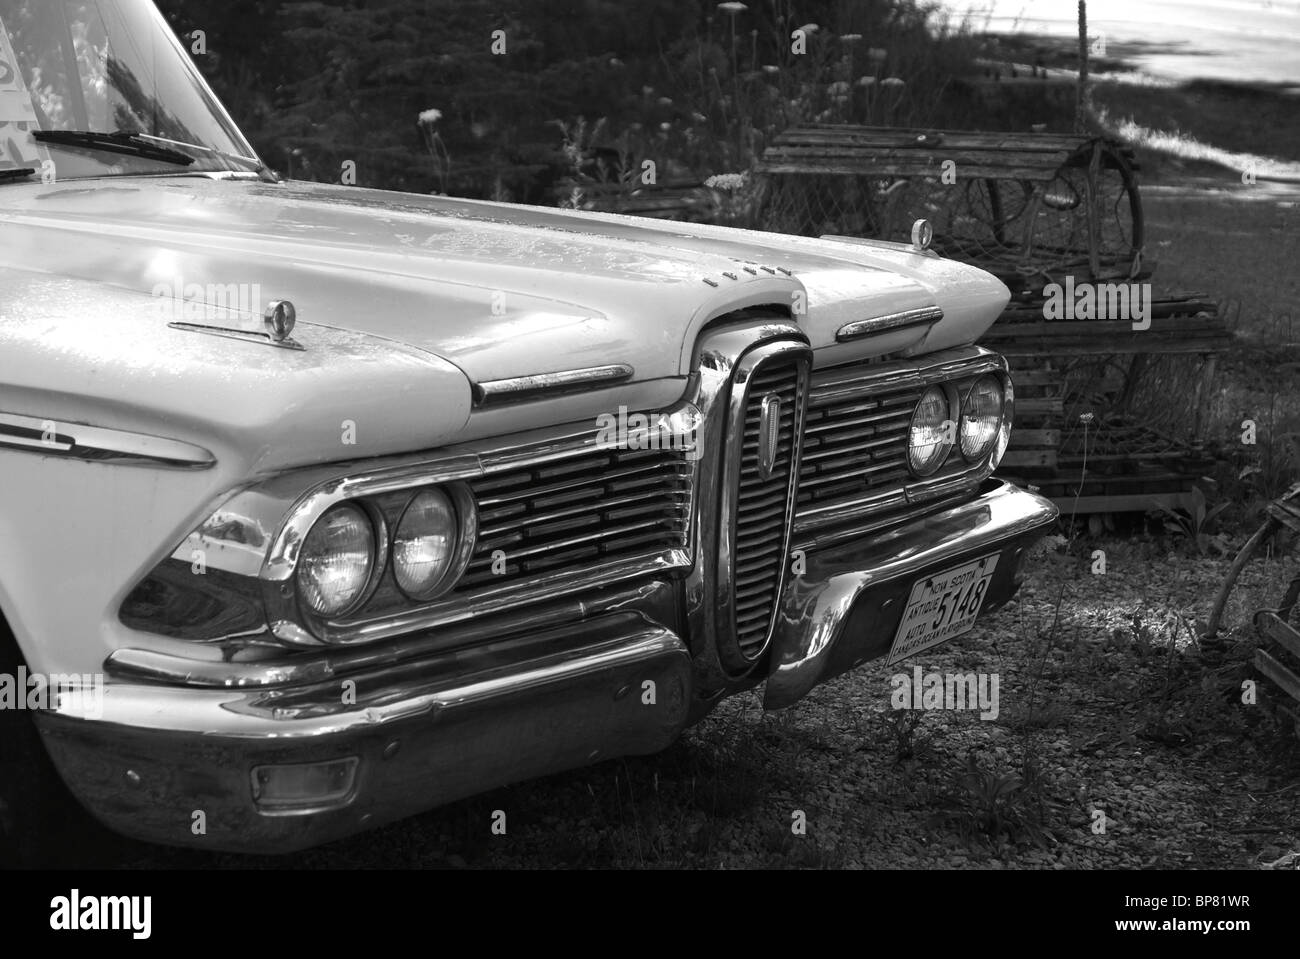 A Ford Edsel bonnet in black and white. Stock Photo